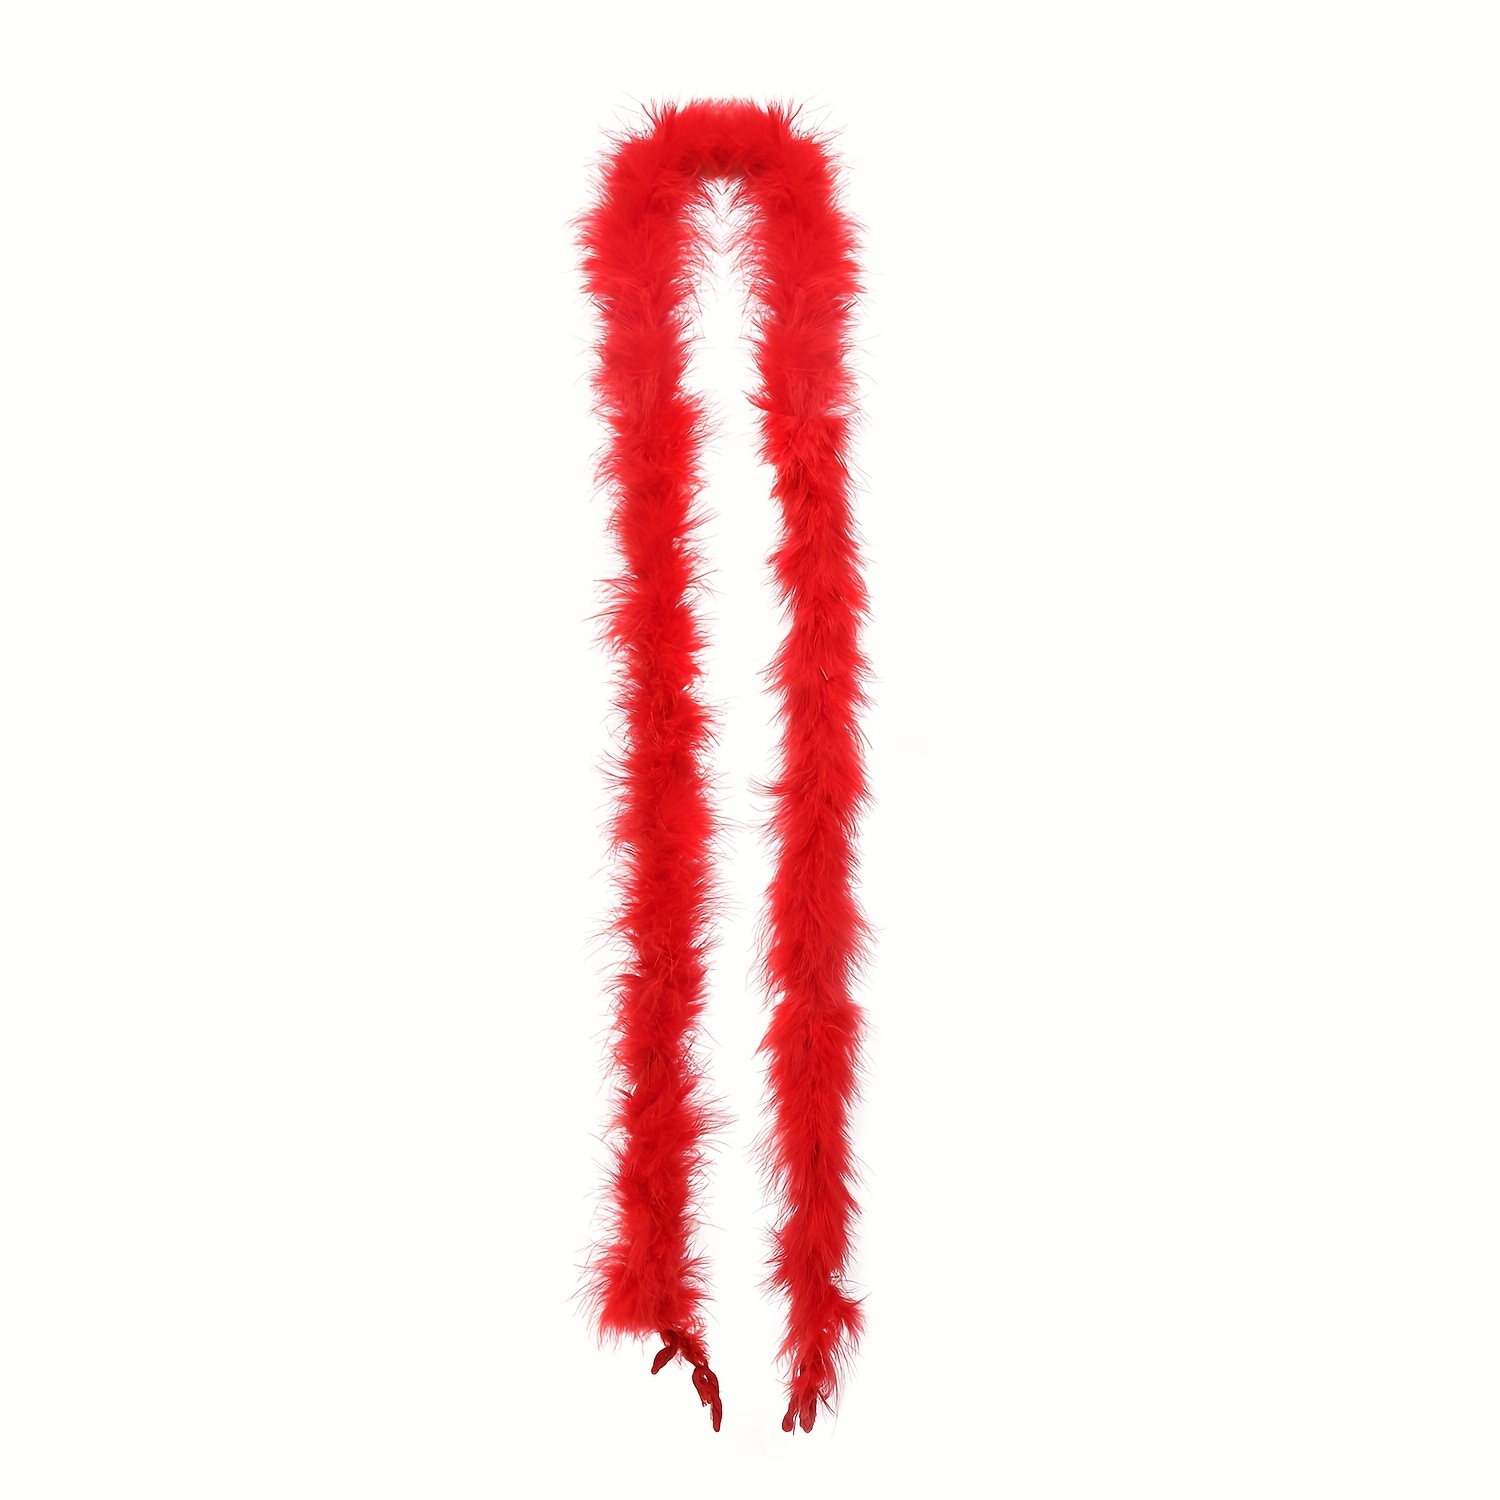 HaiMay 2 Pack Turkey Feather Boa for Craft Clothes Party, 4.4 Yards  40G/60G/80G Feather Boas